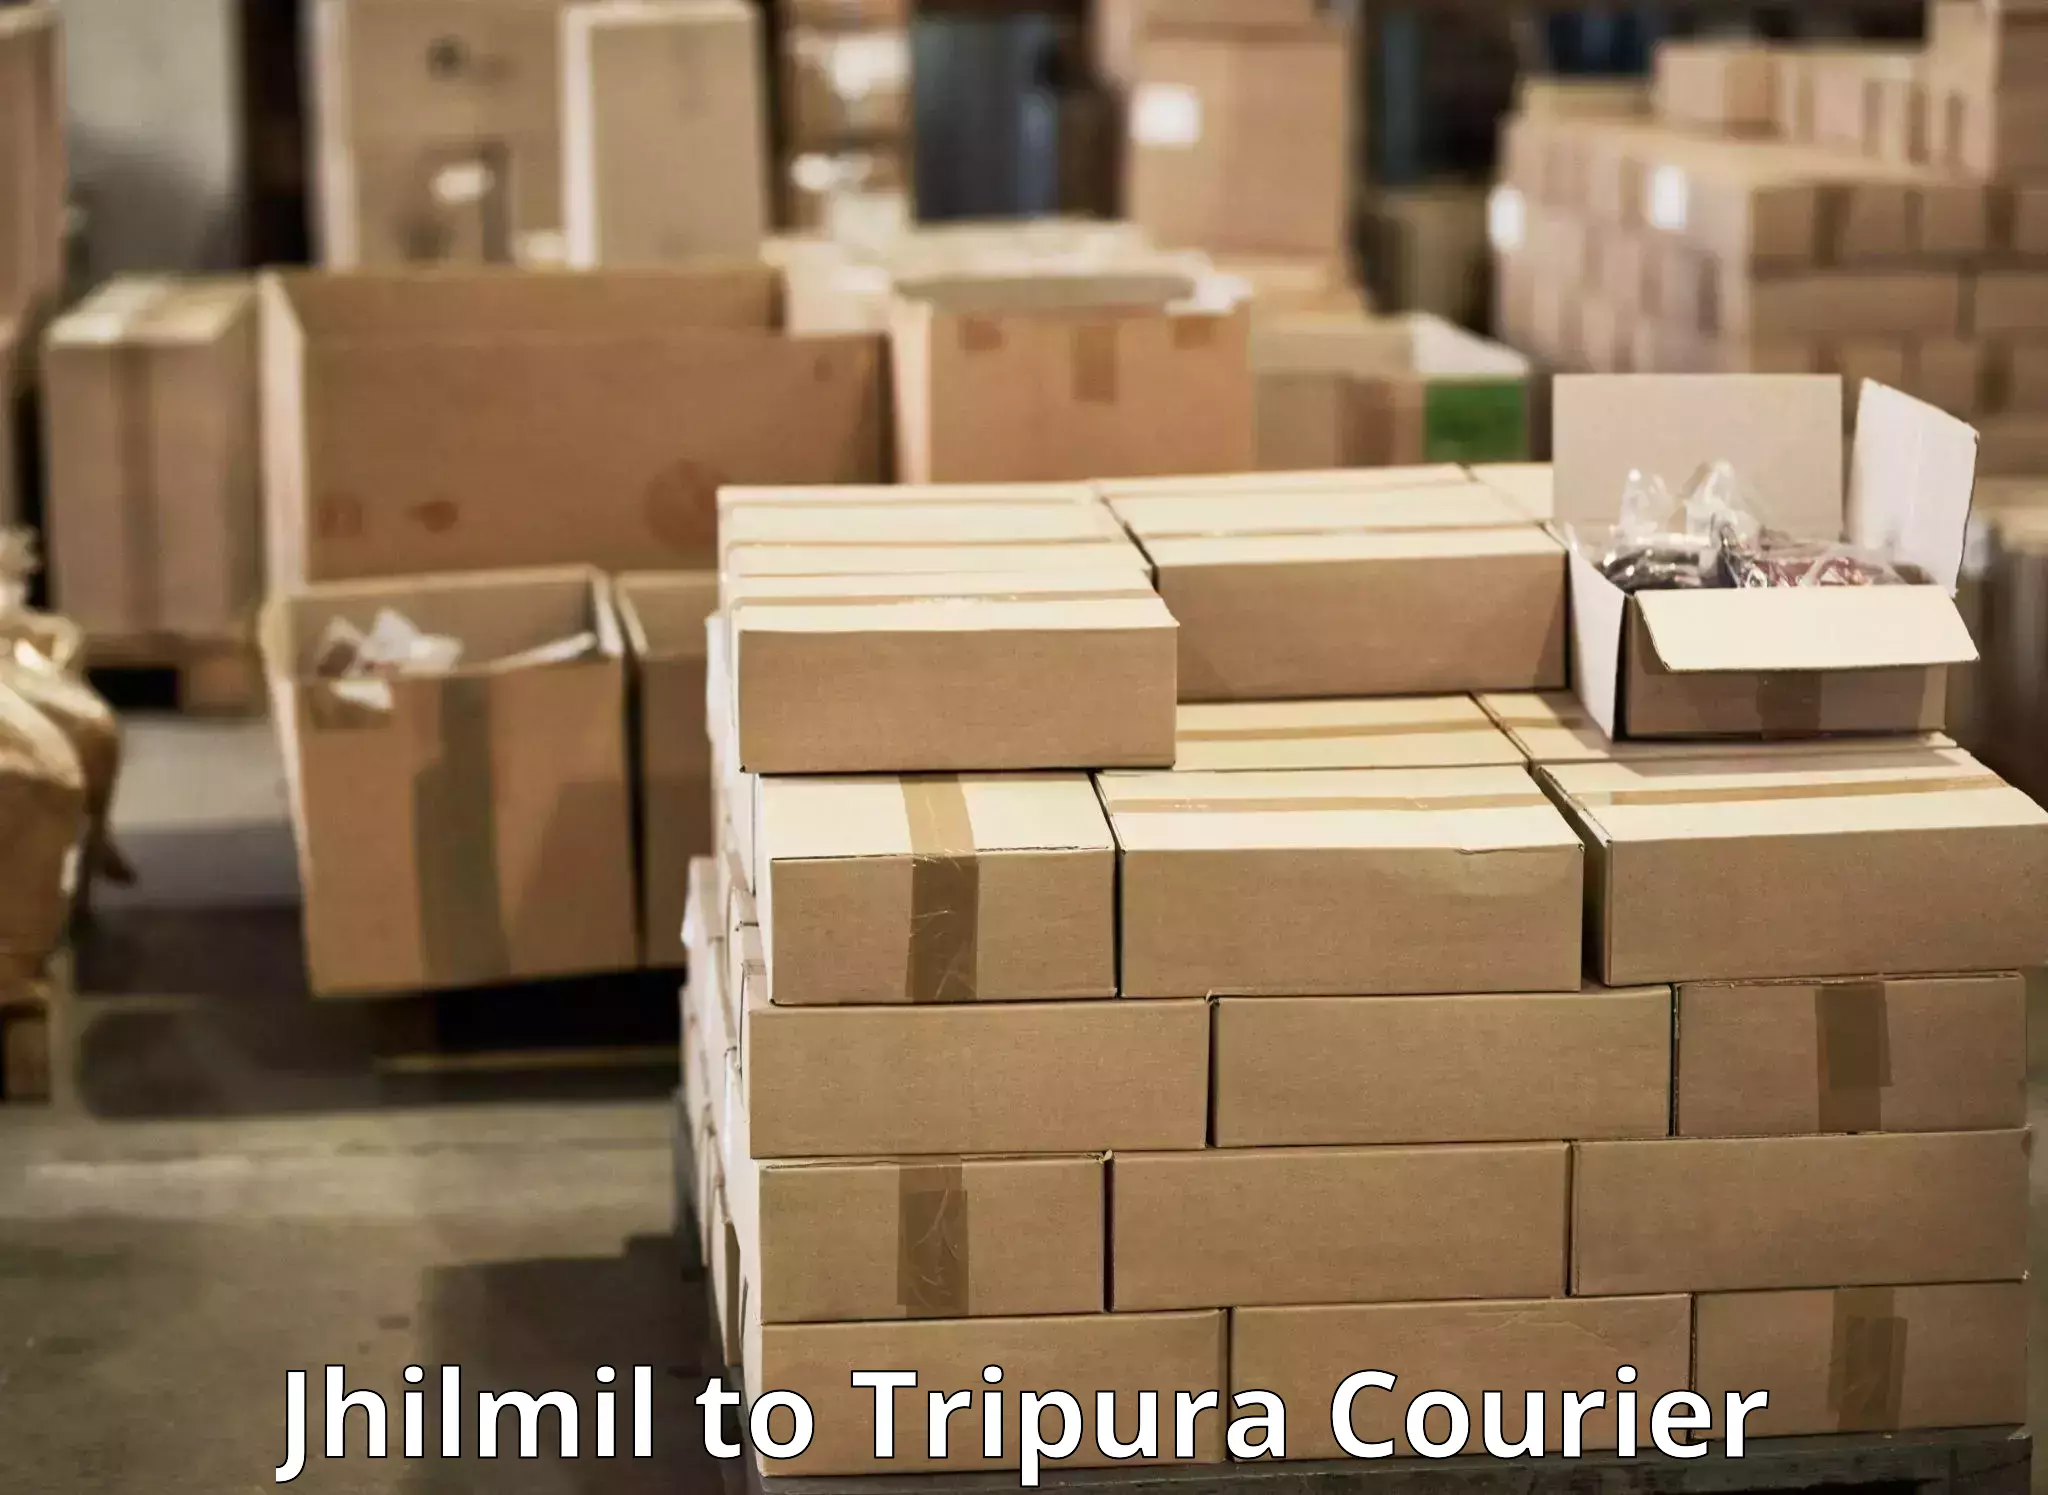 24/7 courier service in Jhilmil to Udaipur Tripura